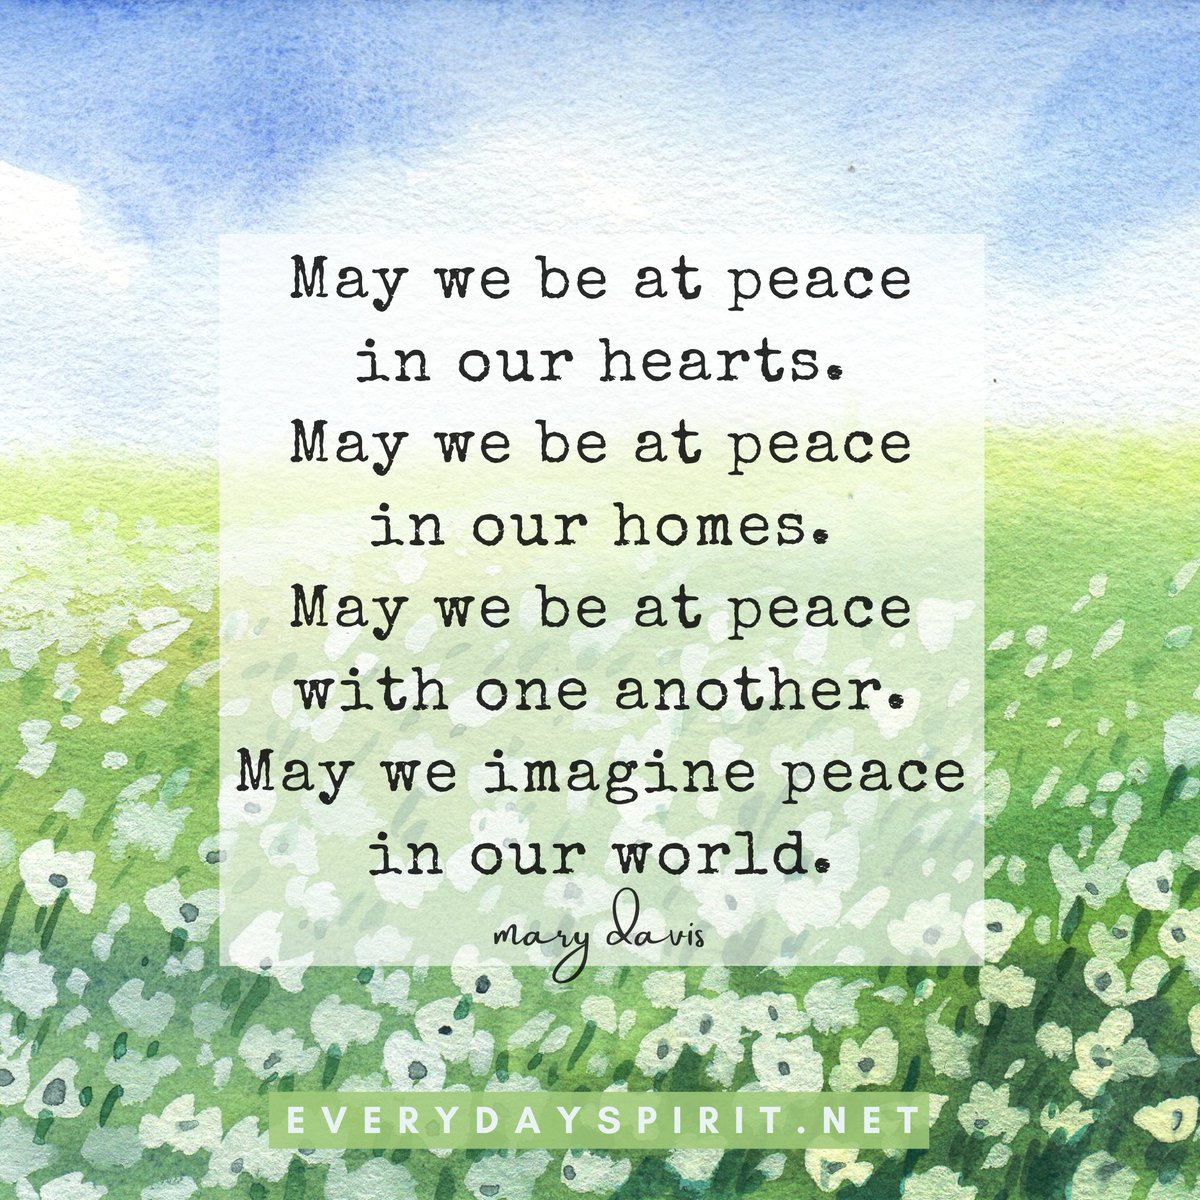 May we be at peace in our hearts. May we be at peace in our homes. May we be at peace with one another. May we imagine peace in our world. - Mary Davis ~ There's many aspects with peace. ~ #Peace